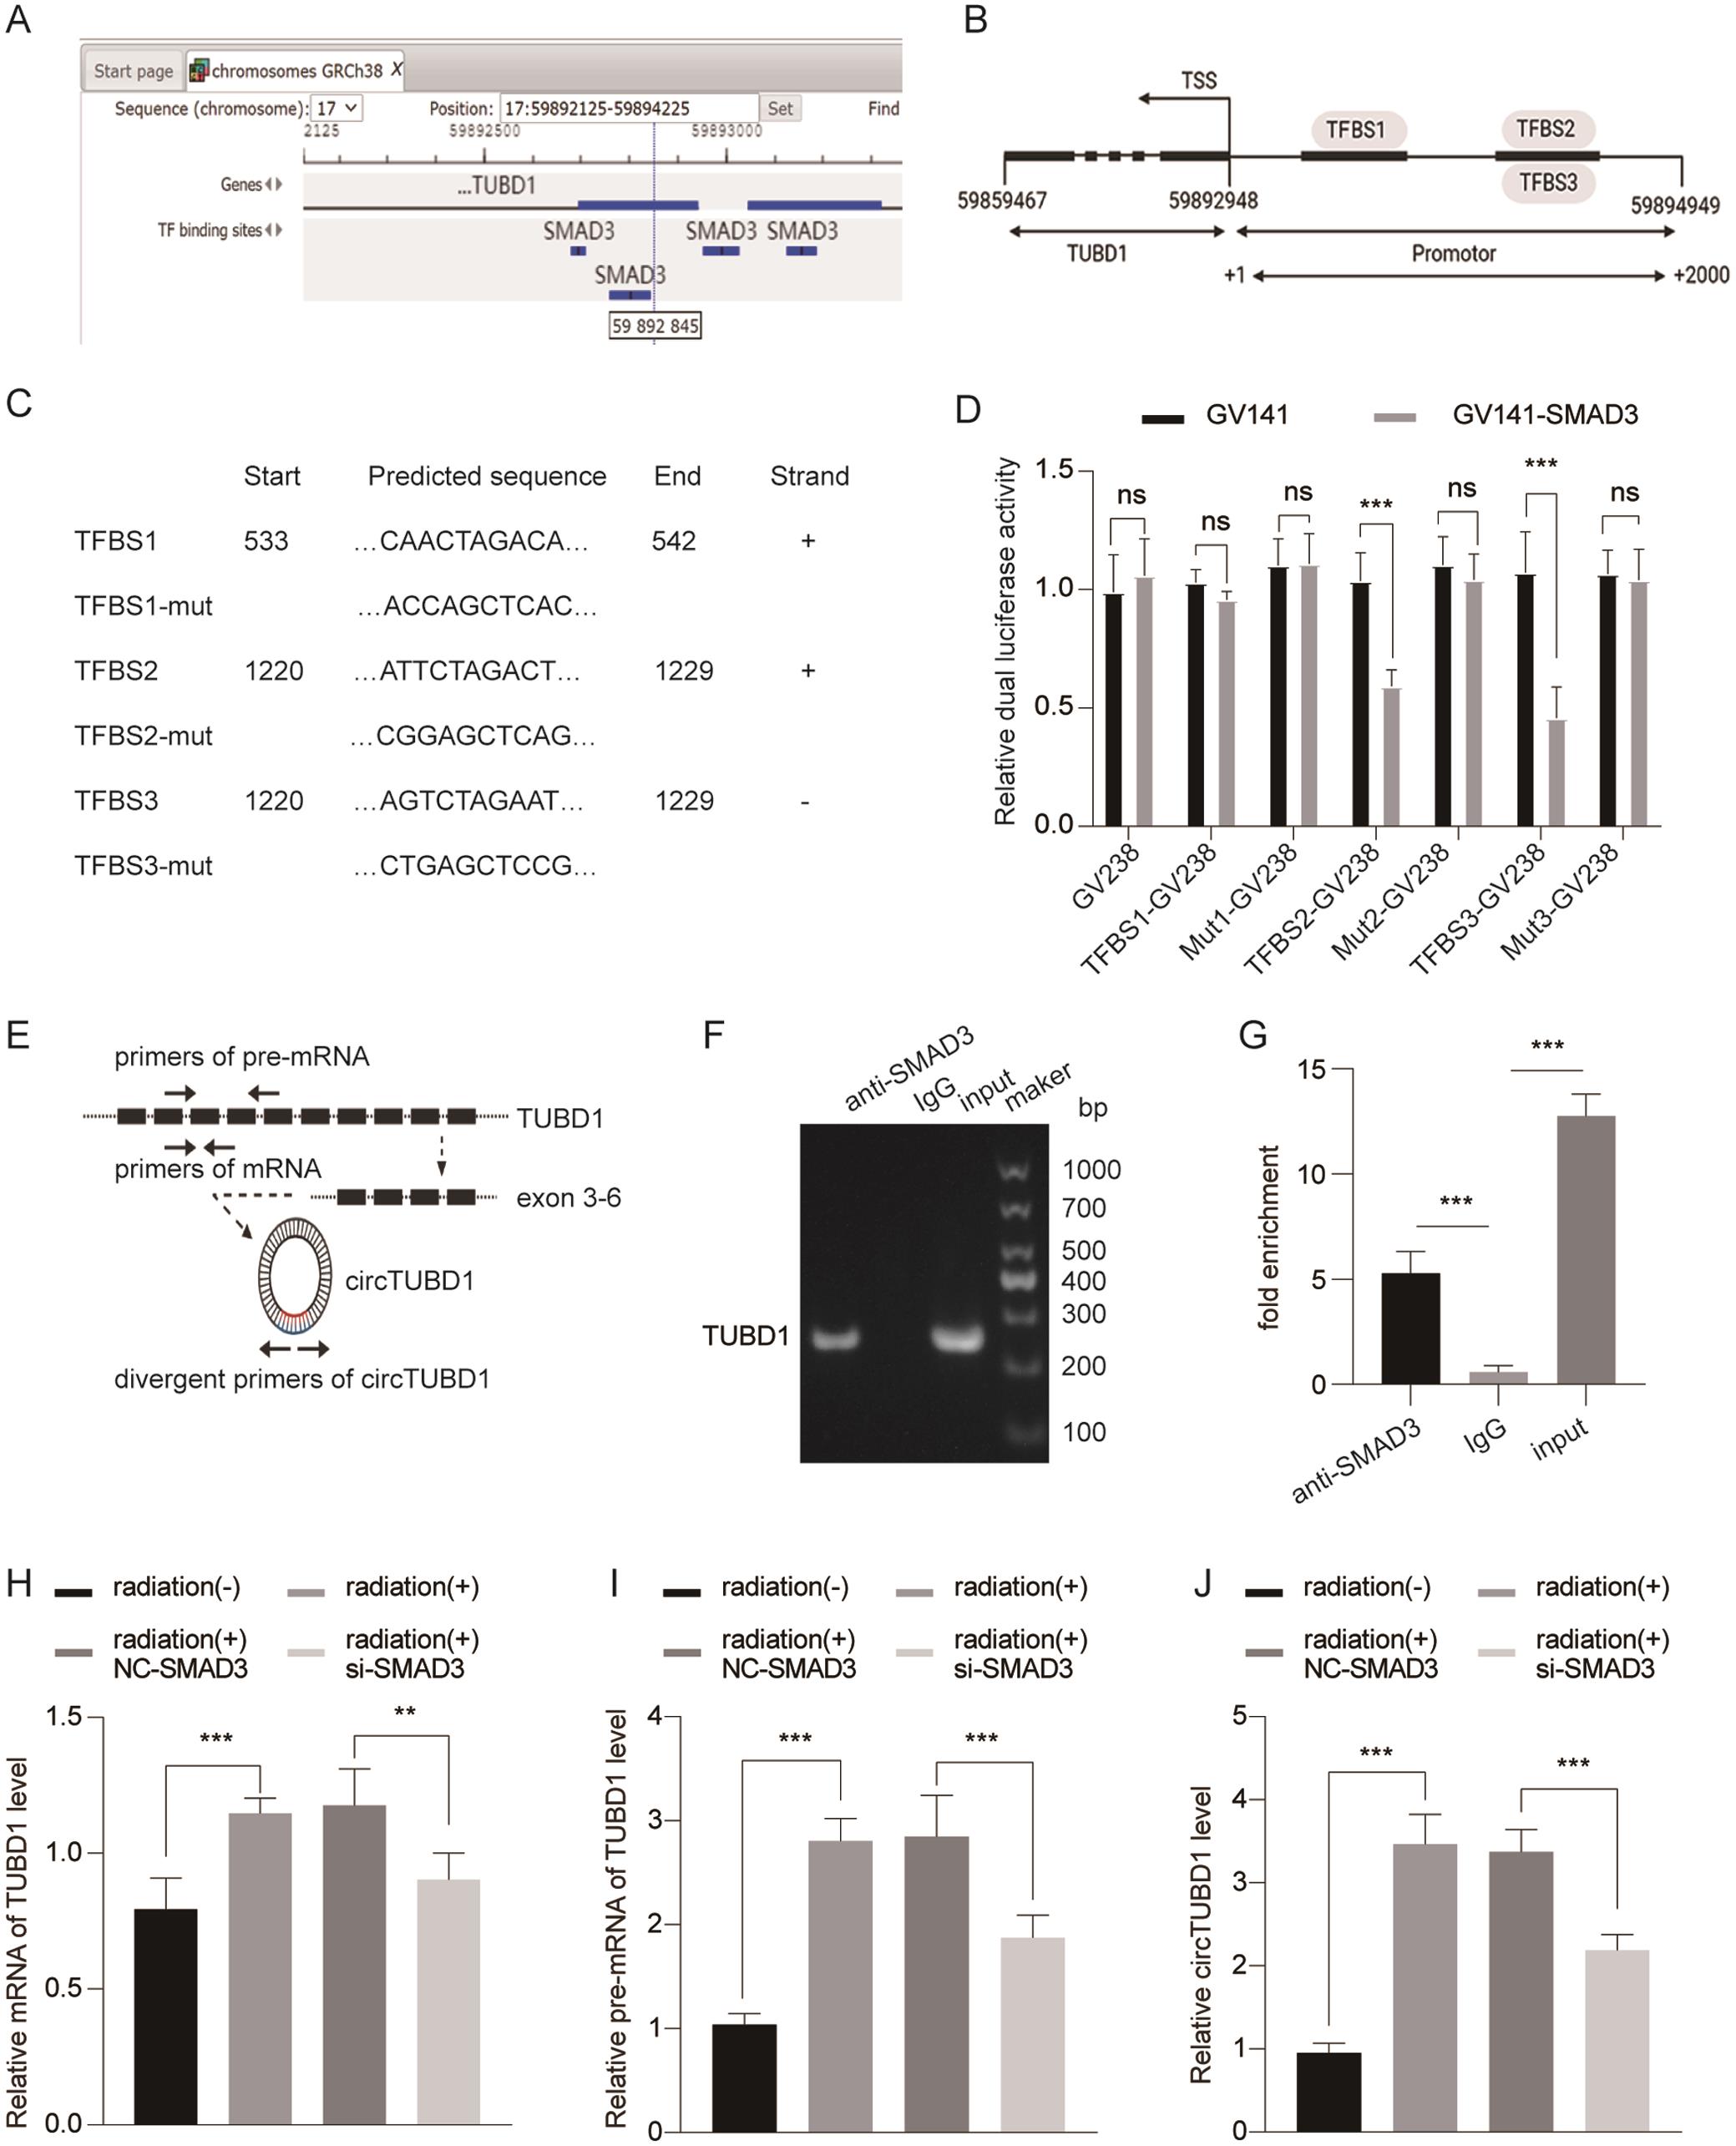 SMAD3 regulates circTUBD1 by targeting the pre-mRNA of TUBD1.